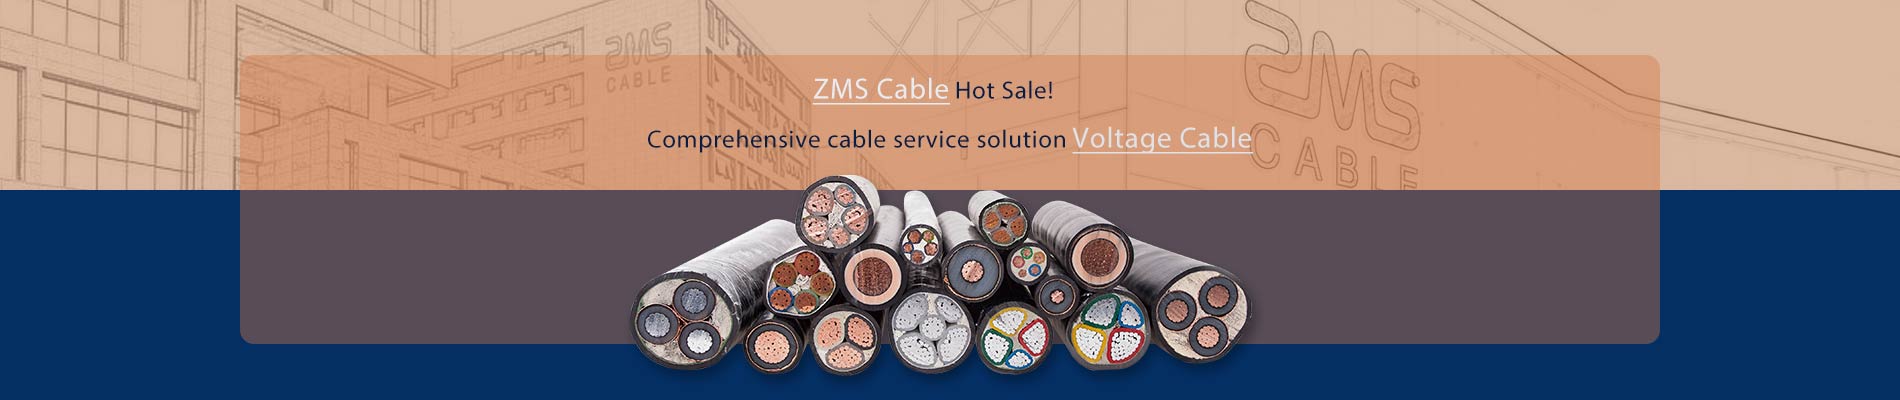 Cable-ZMS-wire-and-cable-supplier